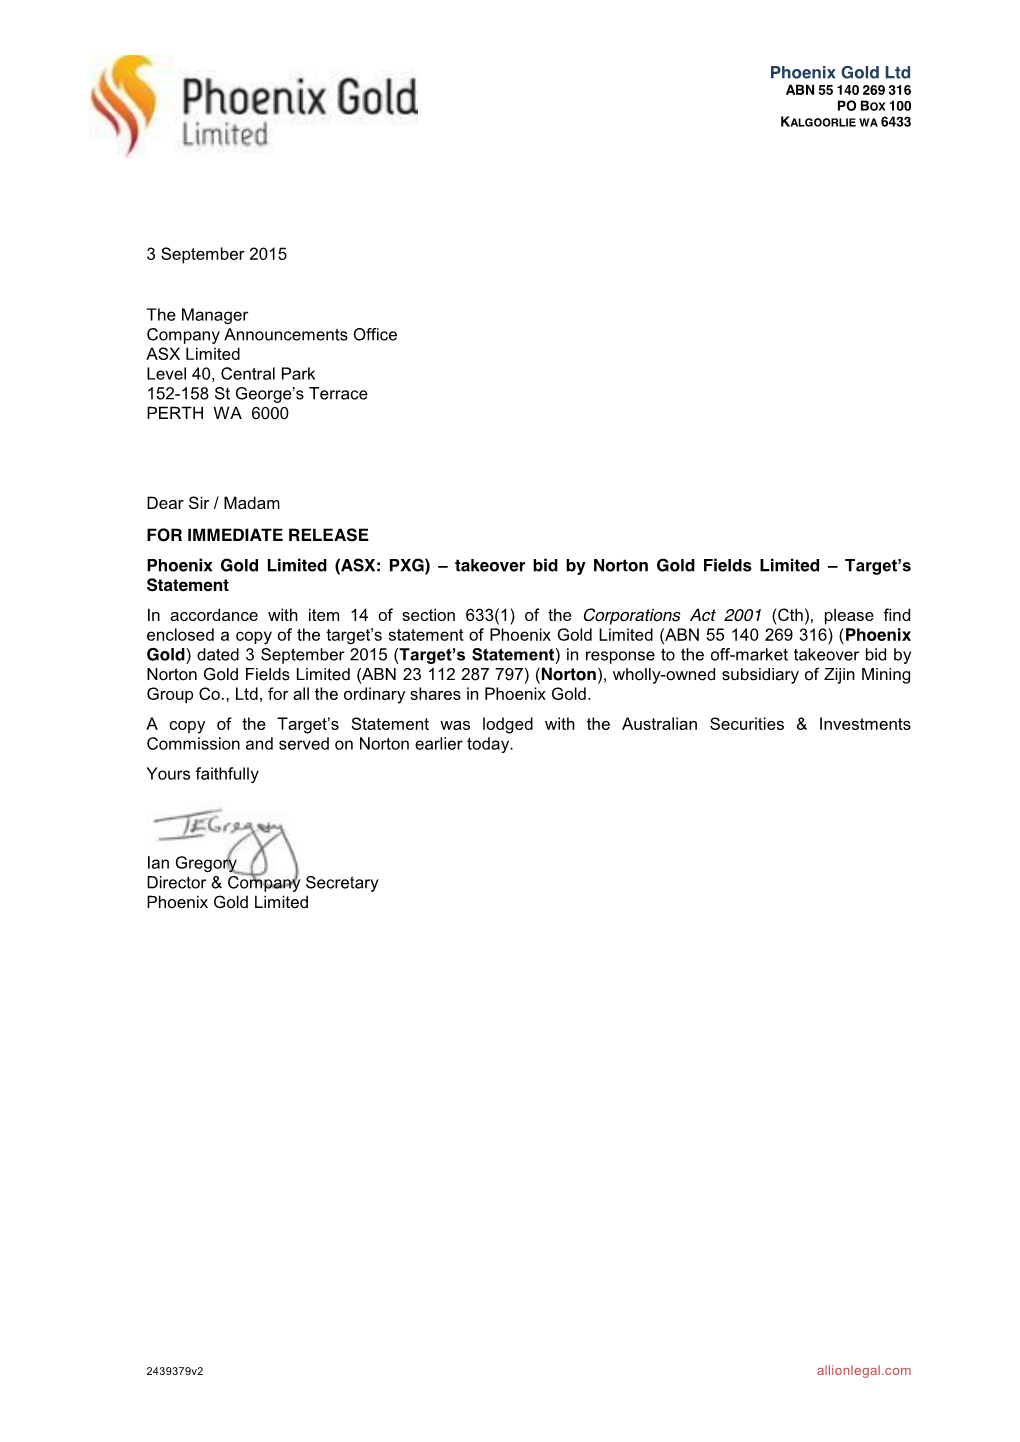 Phoenix Gold Ltd 3 September 2015 the Manager Company